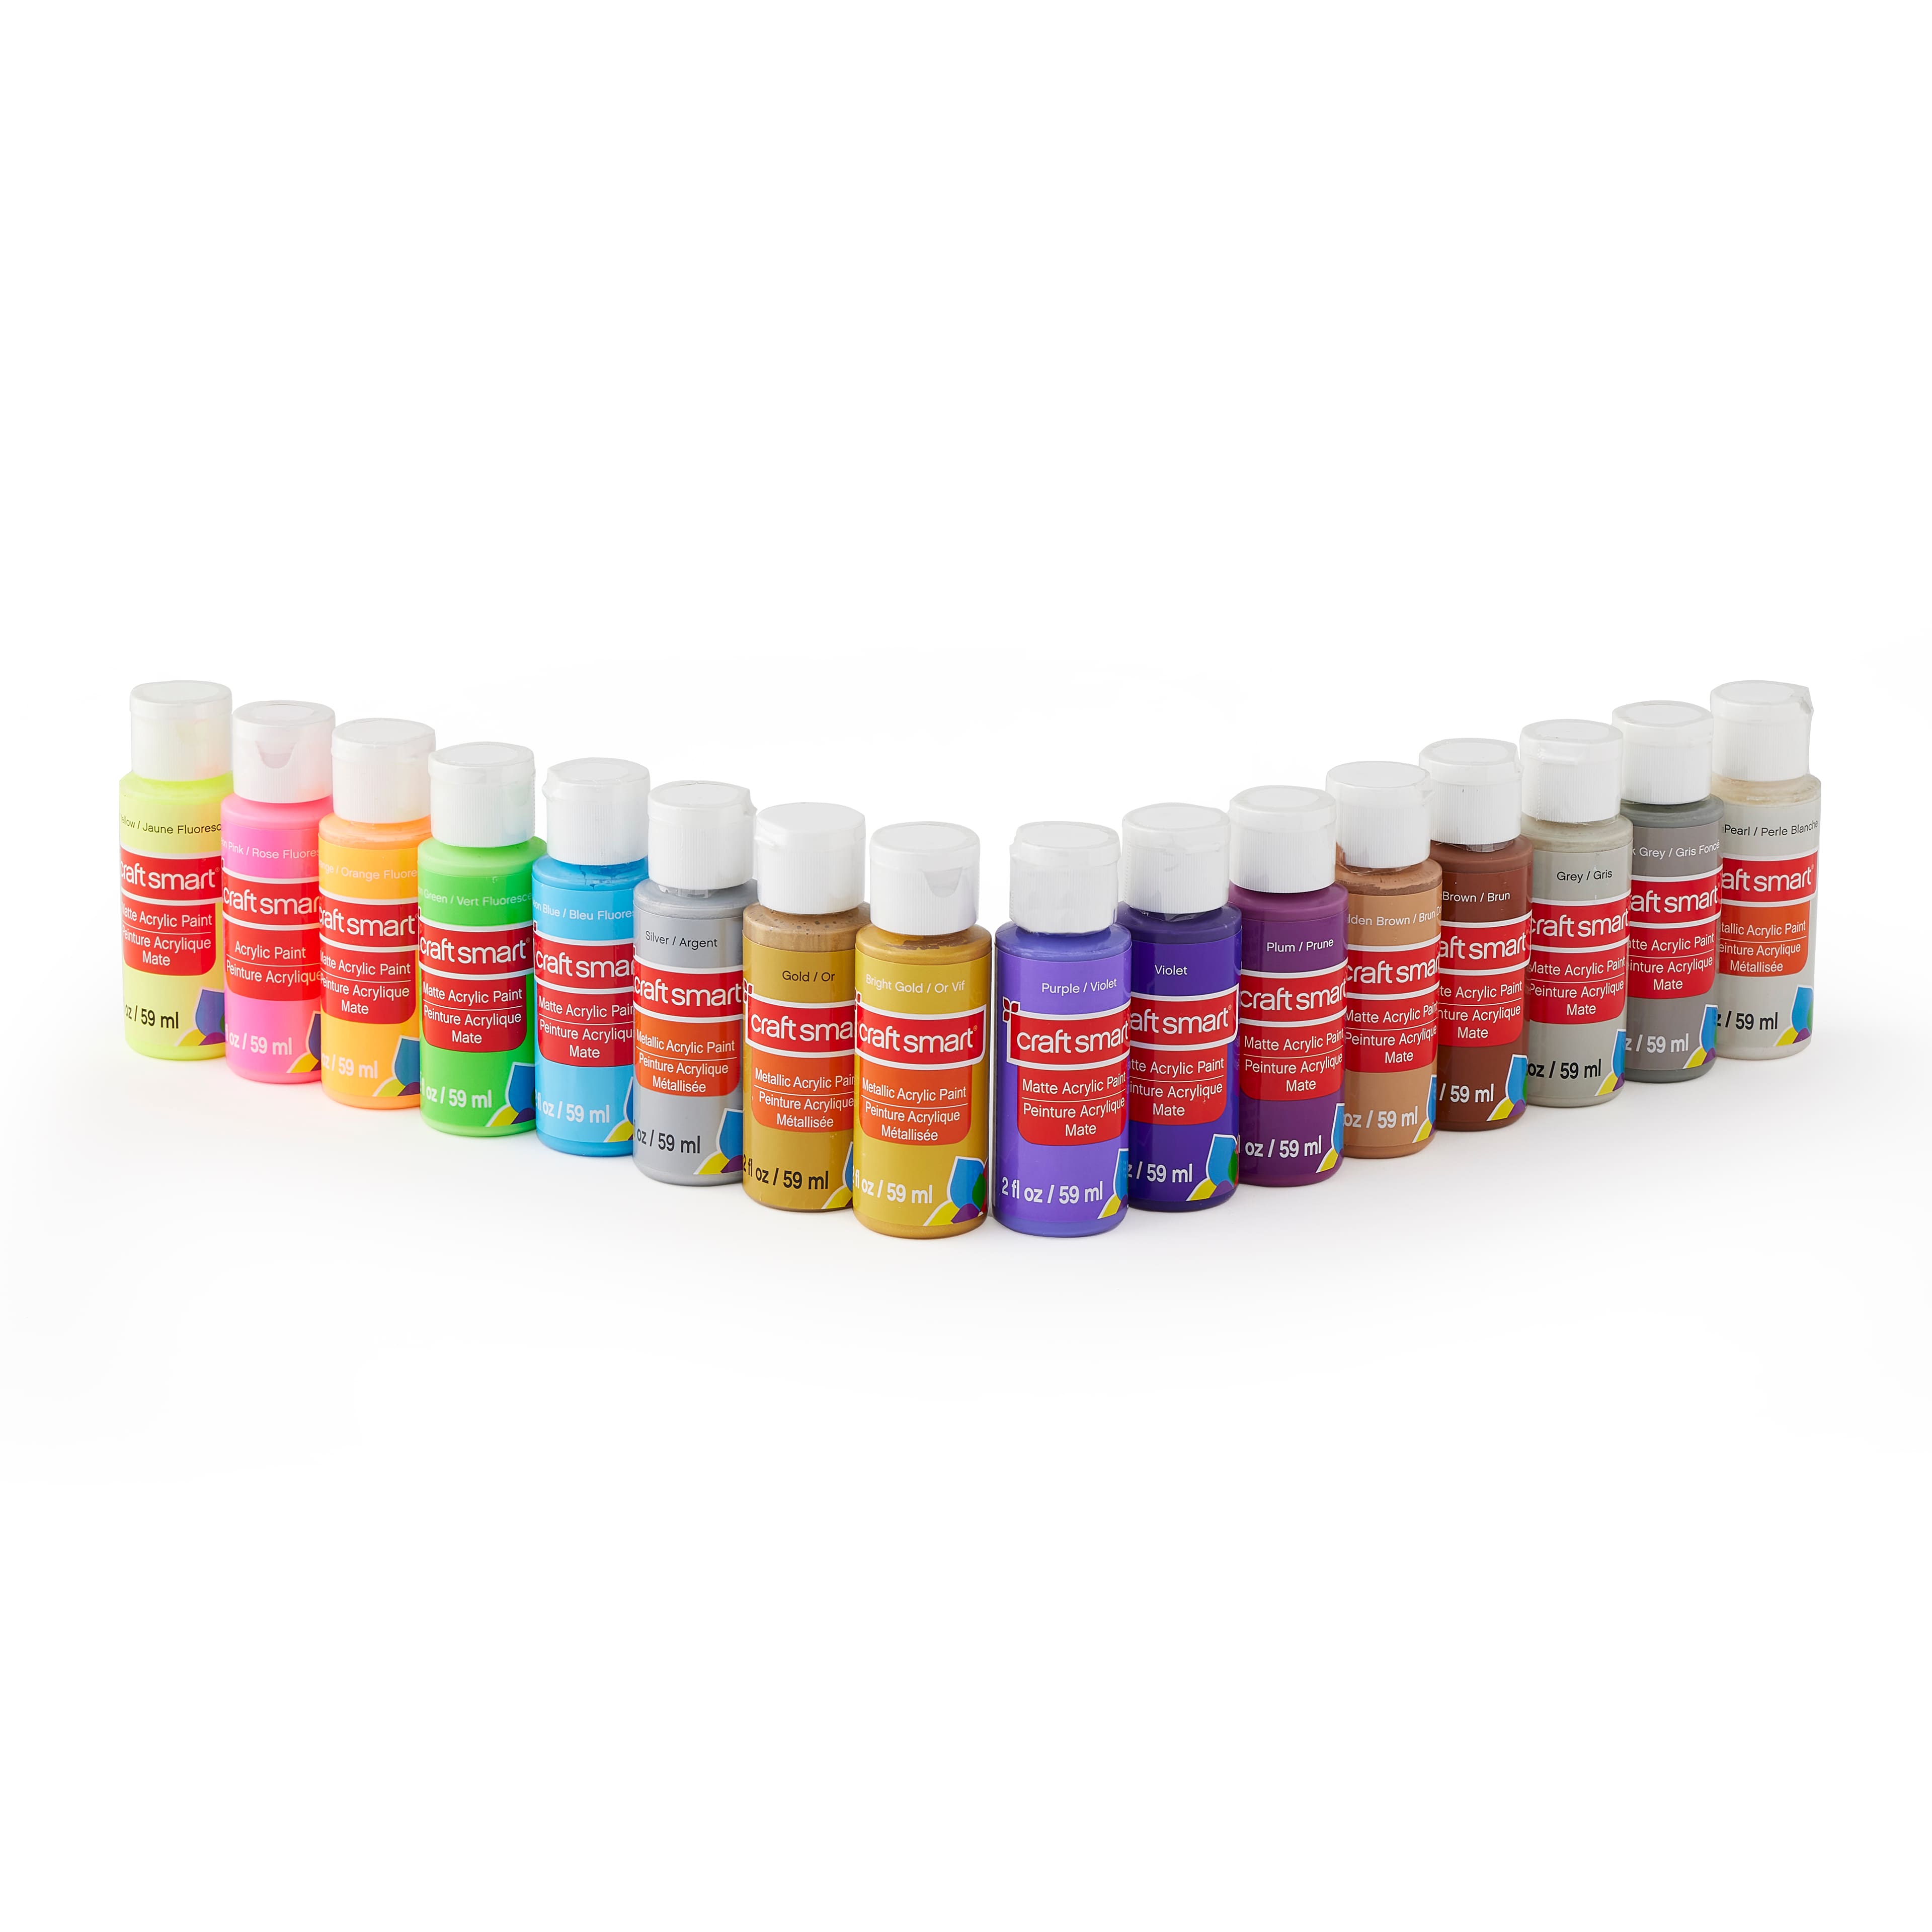 Acrylic Paint by Craft Smart®, 8oz.